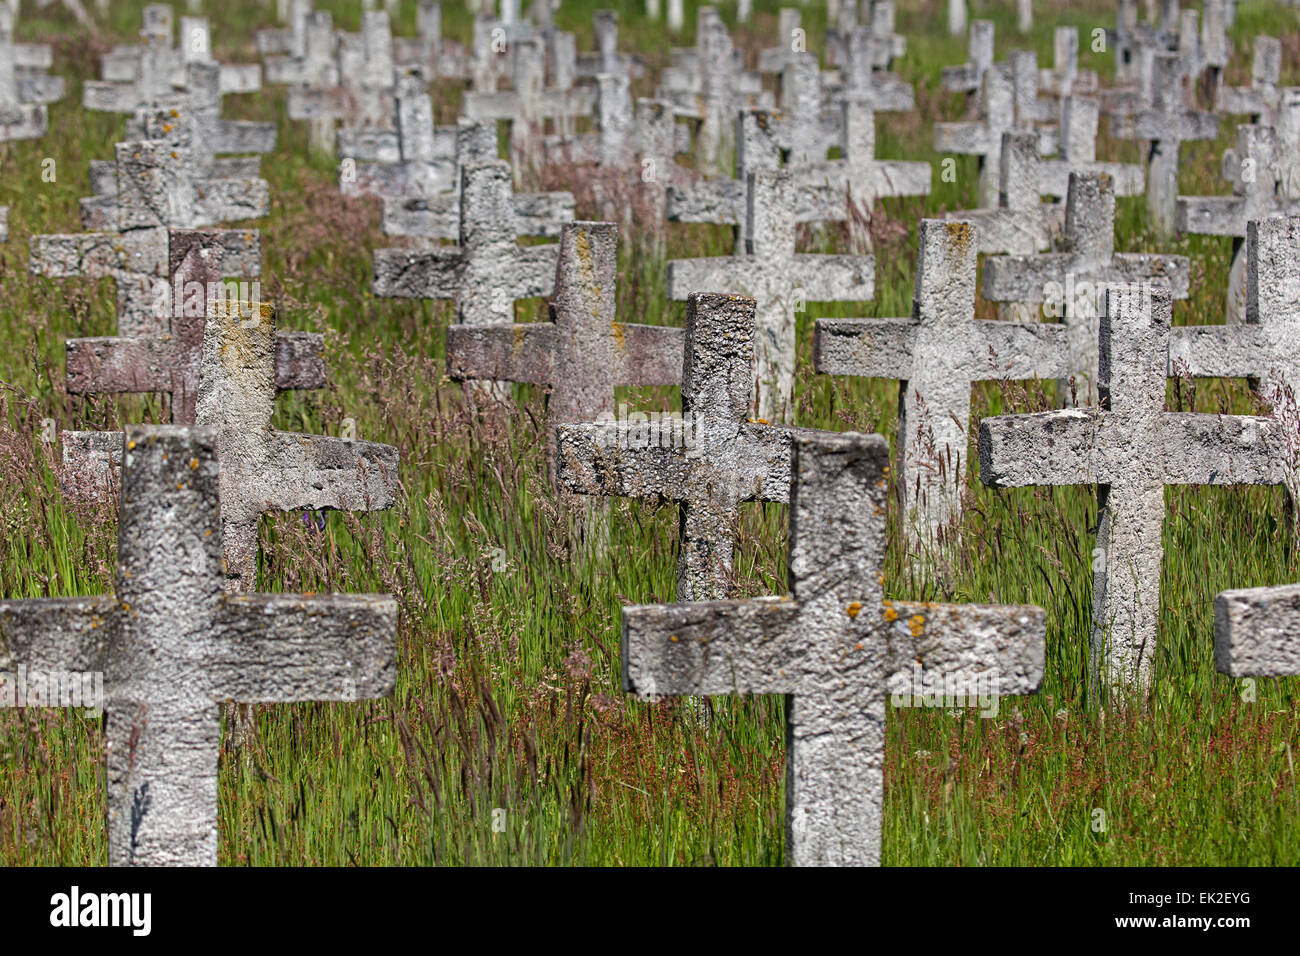 Symbolically cemetery of member of German parliament, Lower Saxony, Germany, Europe Stock Photo